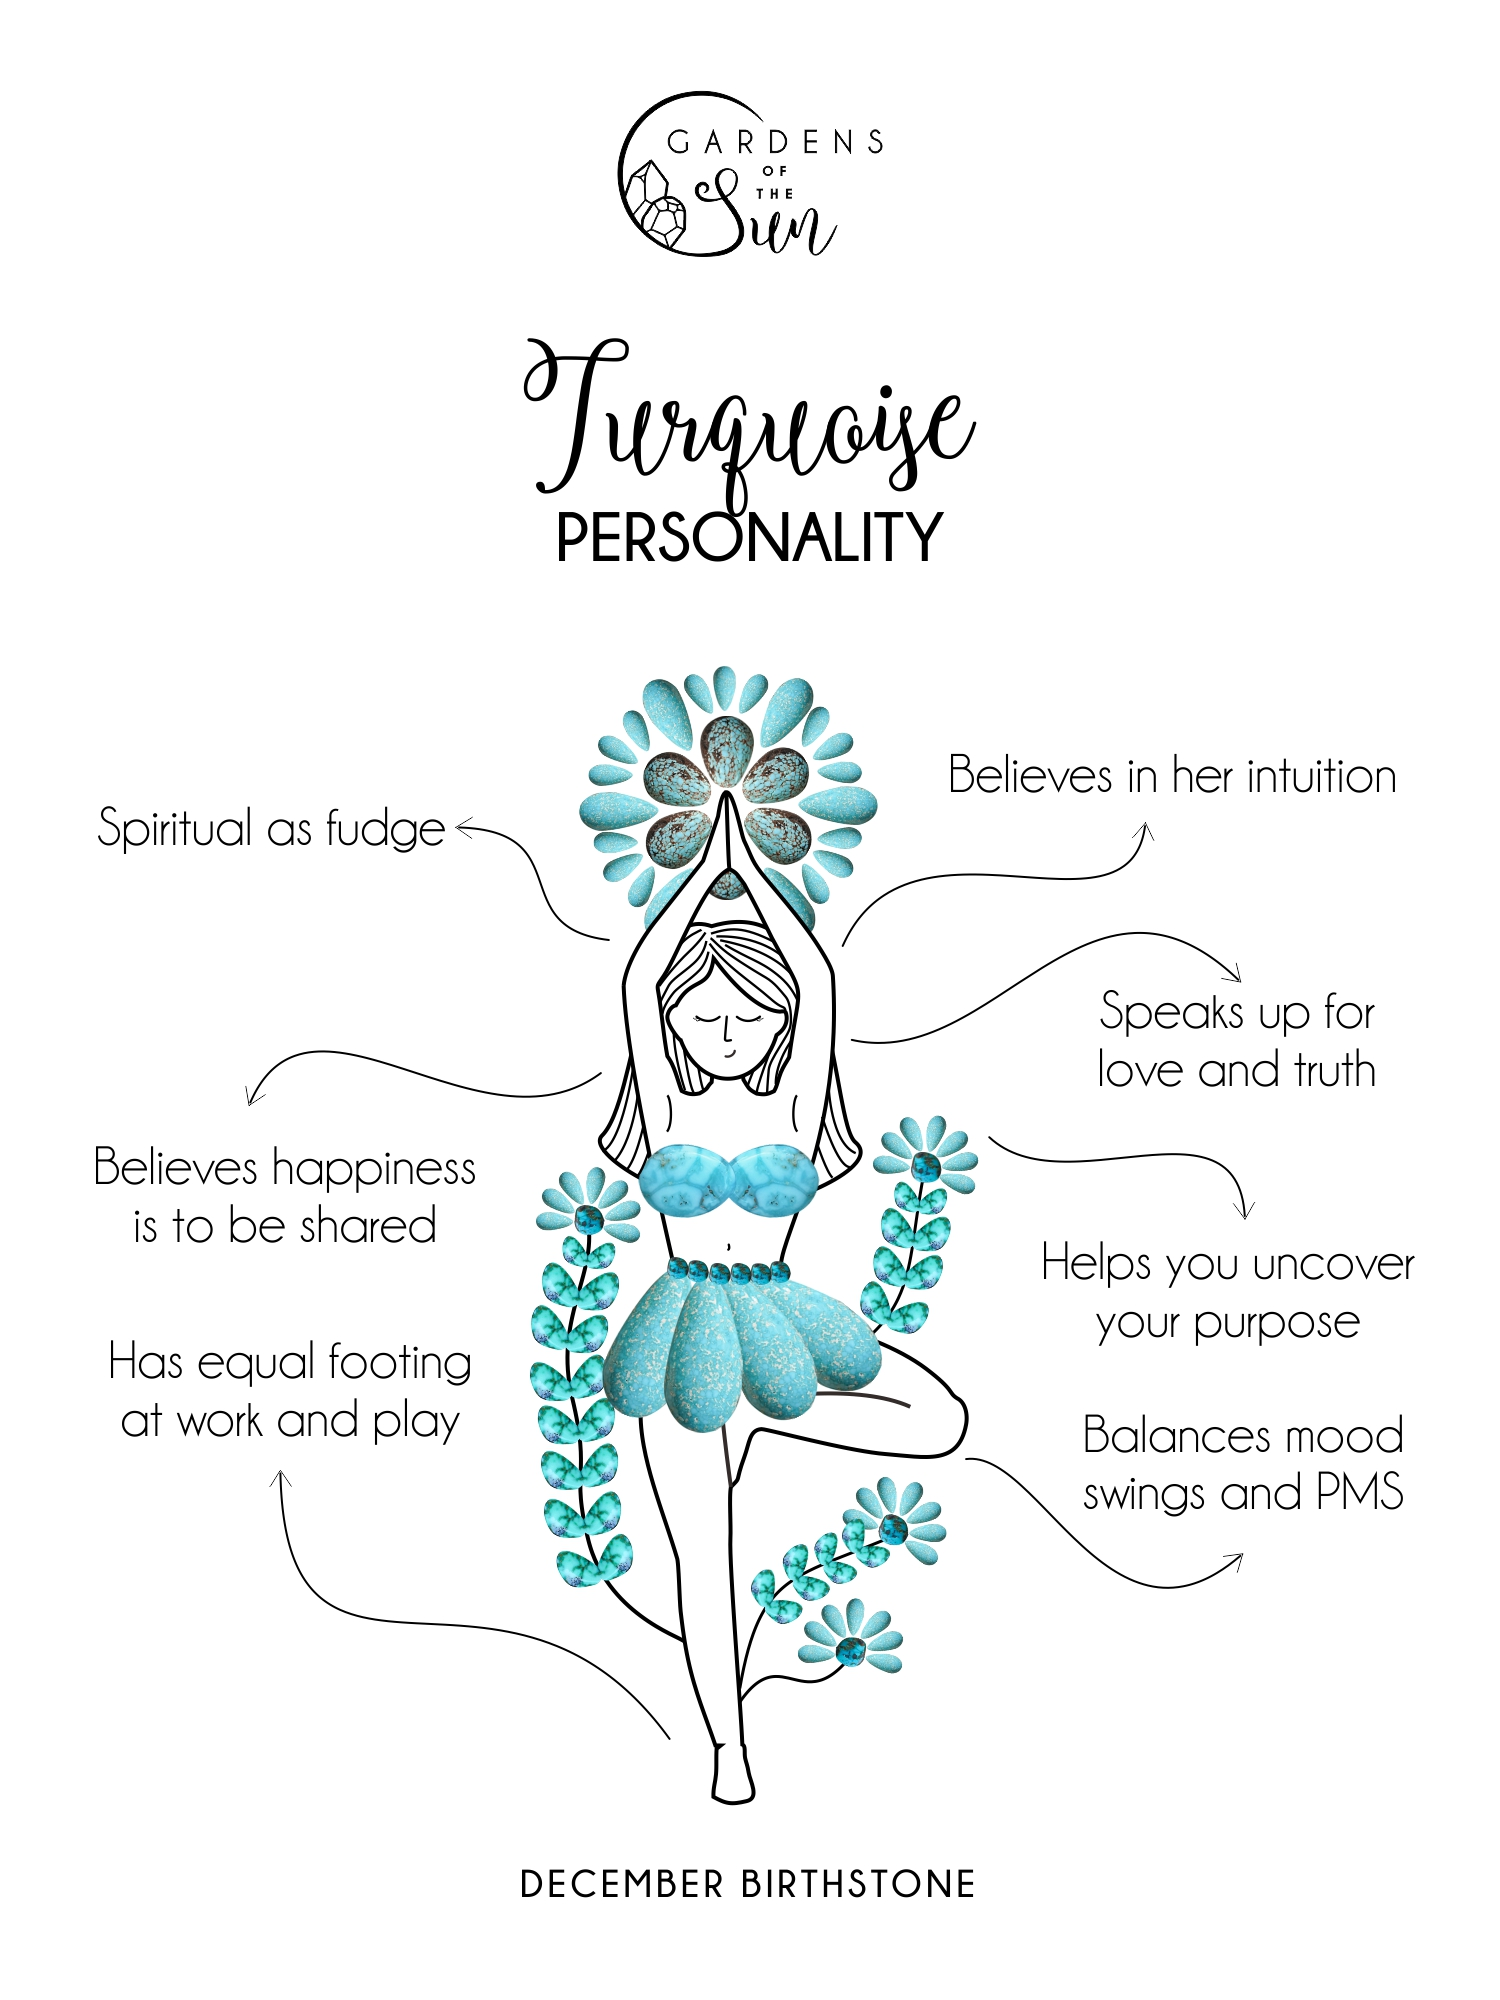 Turquoise personality traits